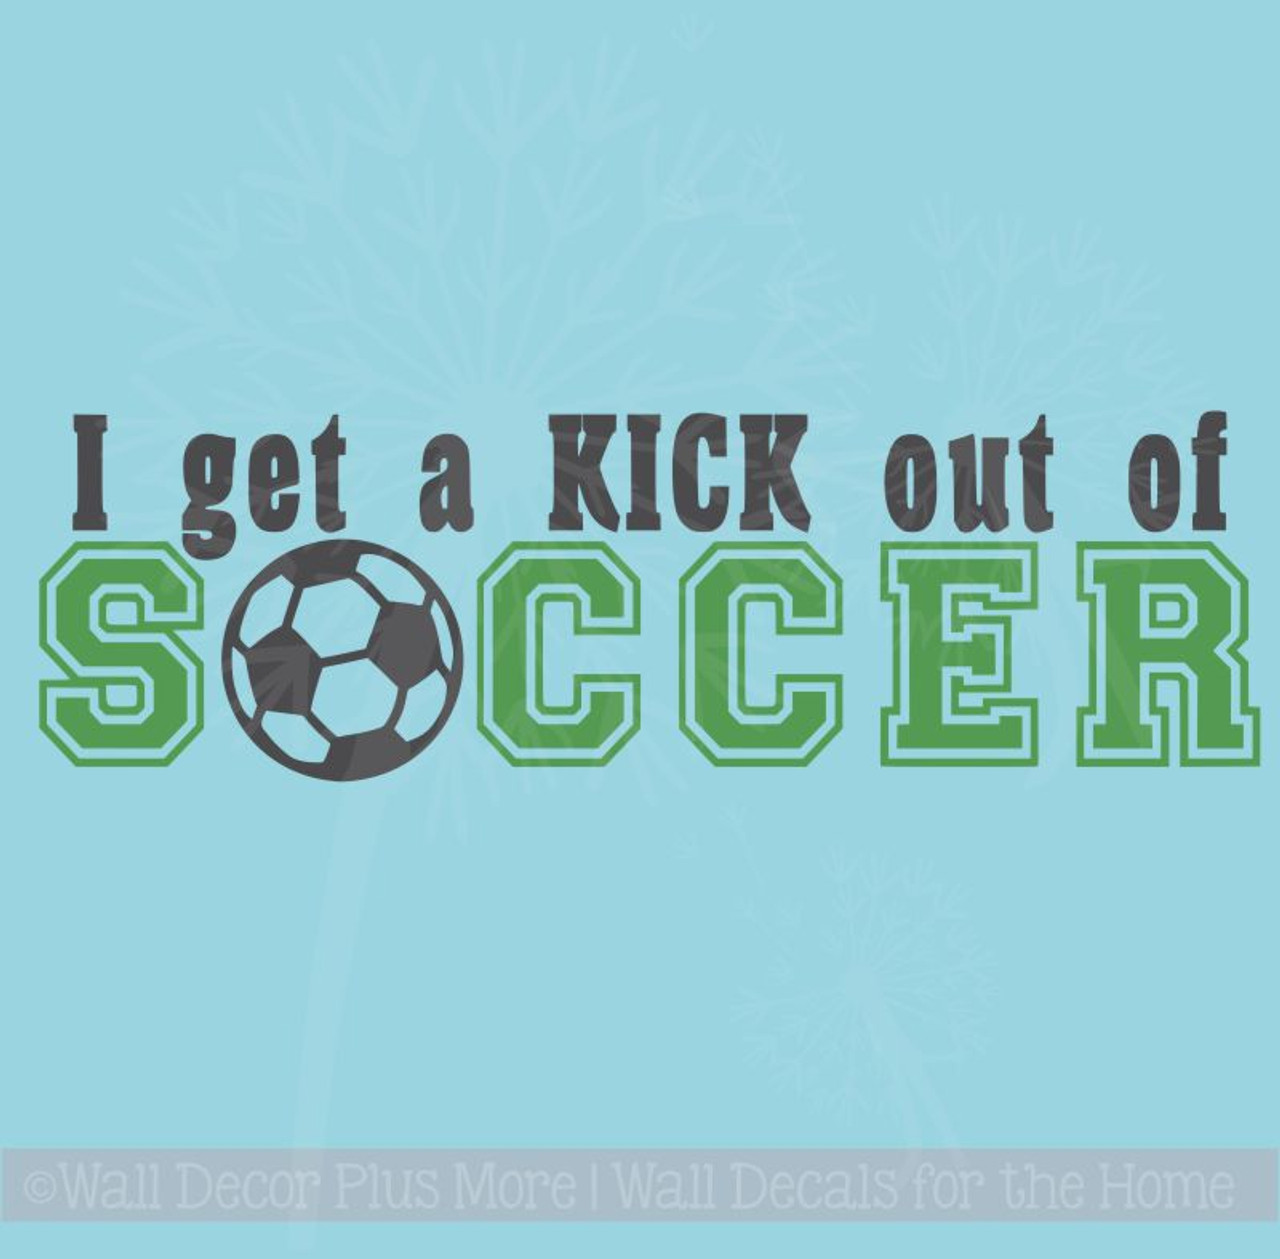 Kick Out of Soccer Sports Decals Wall Stickers Vinyl Lettering Art Boy ...